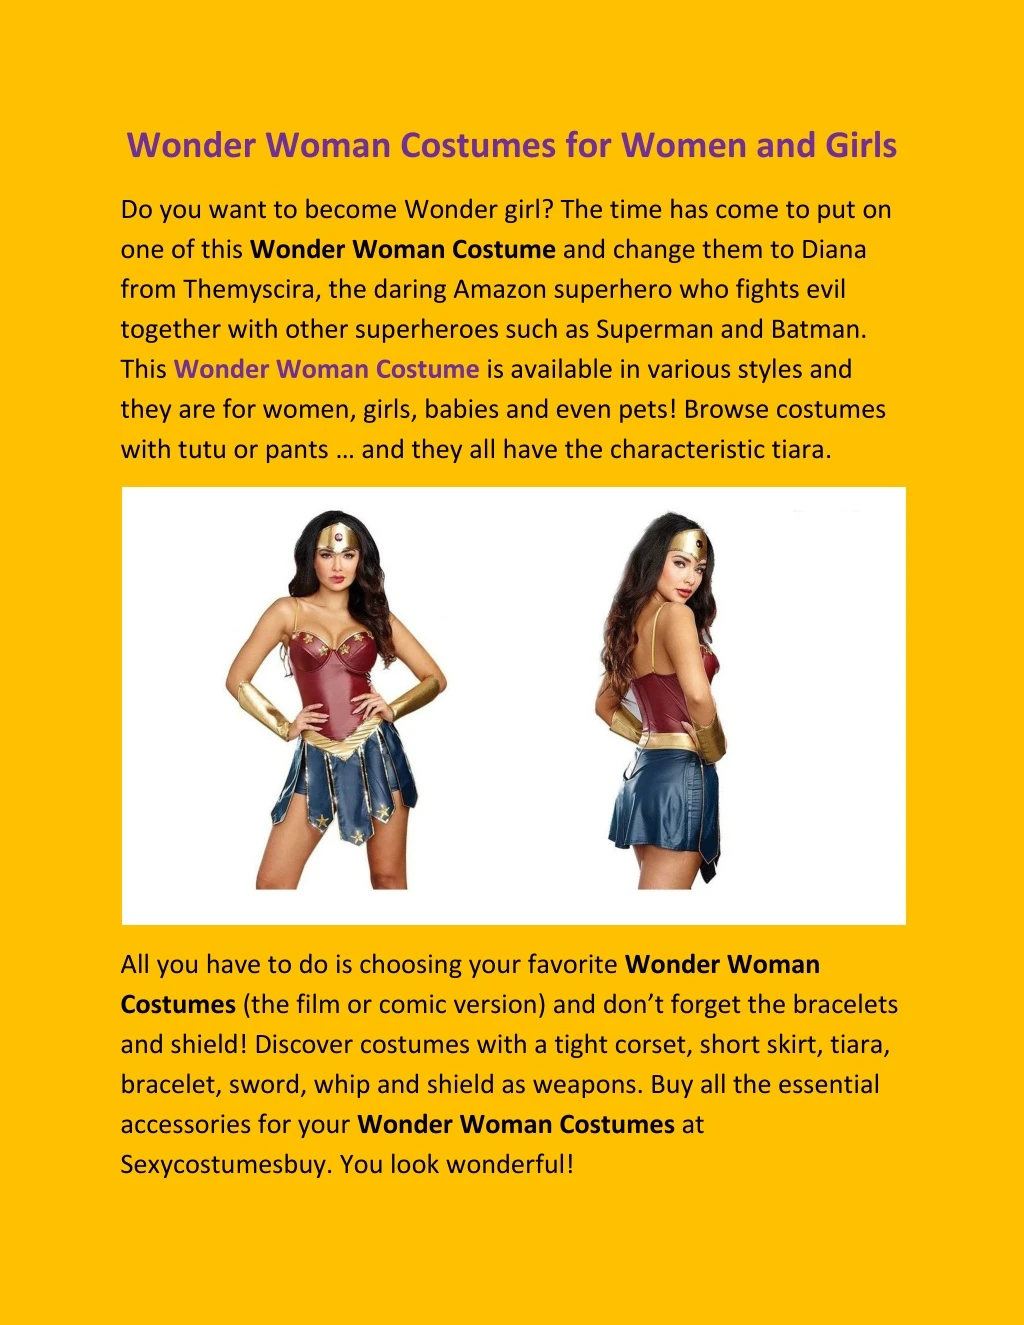 wonder woman costumes for women and girls